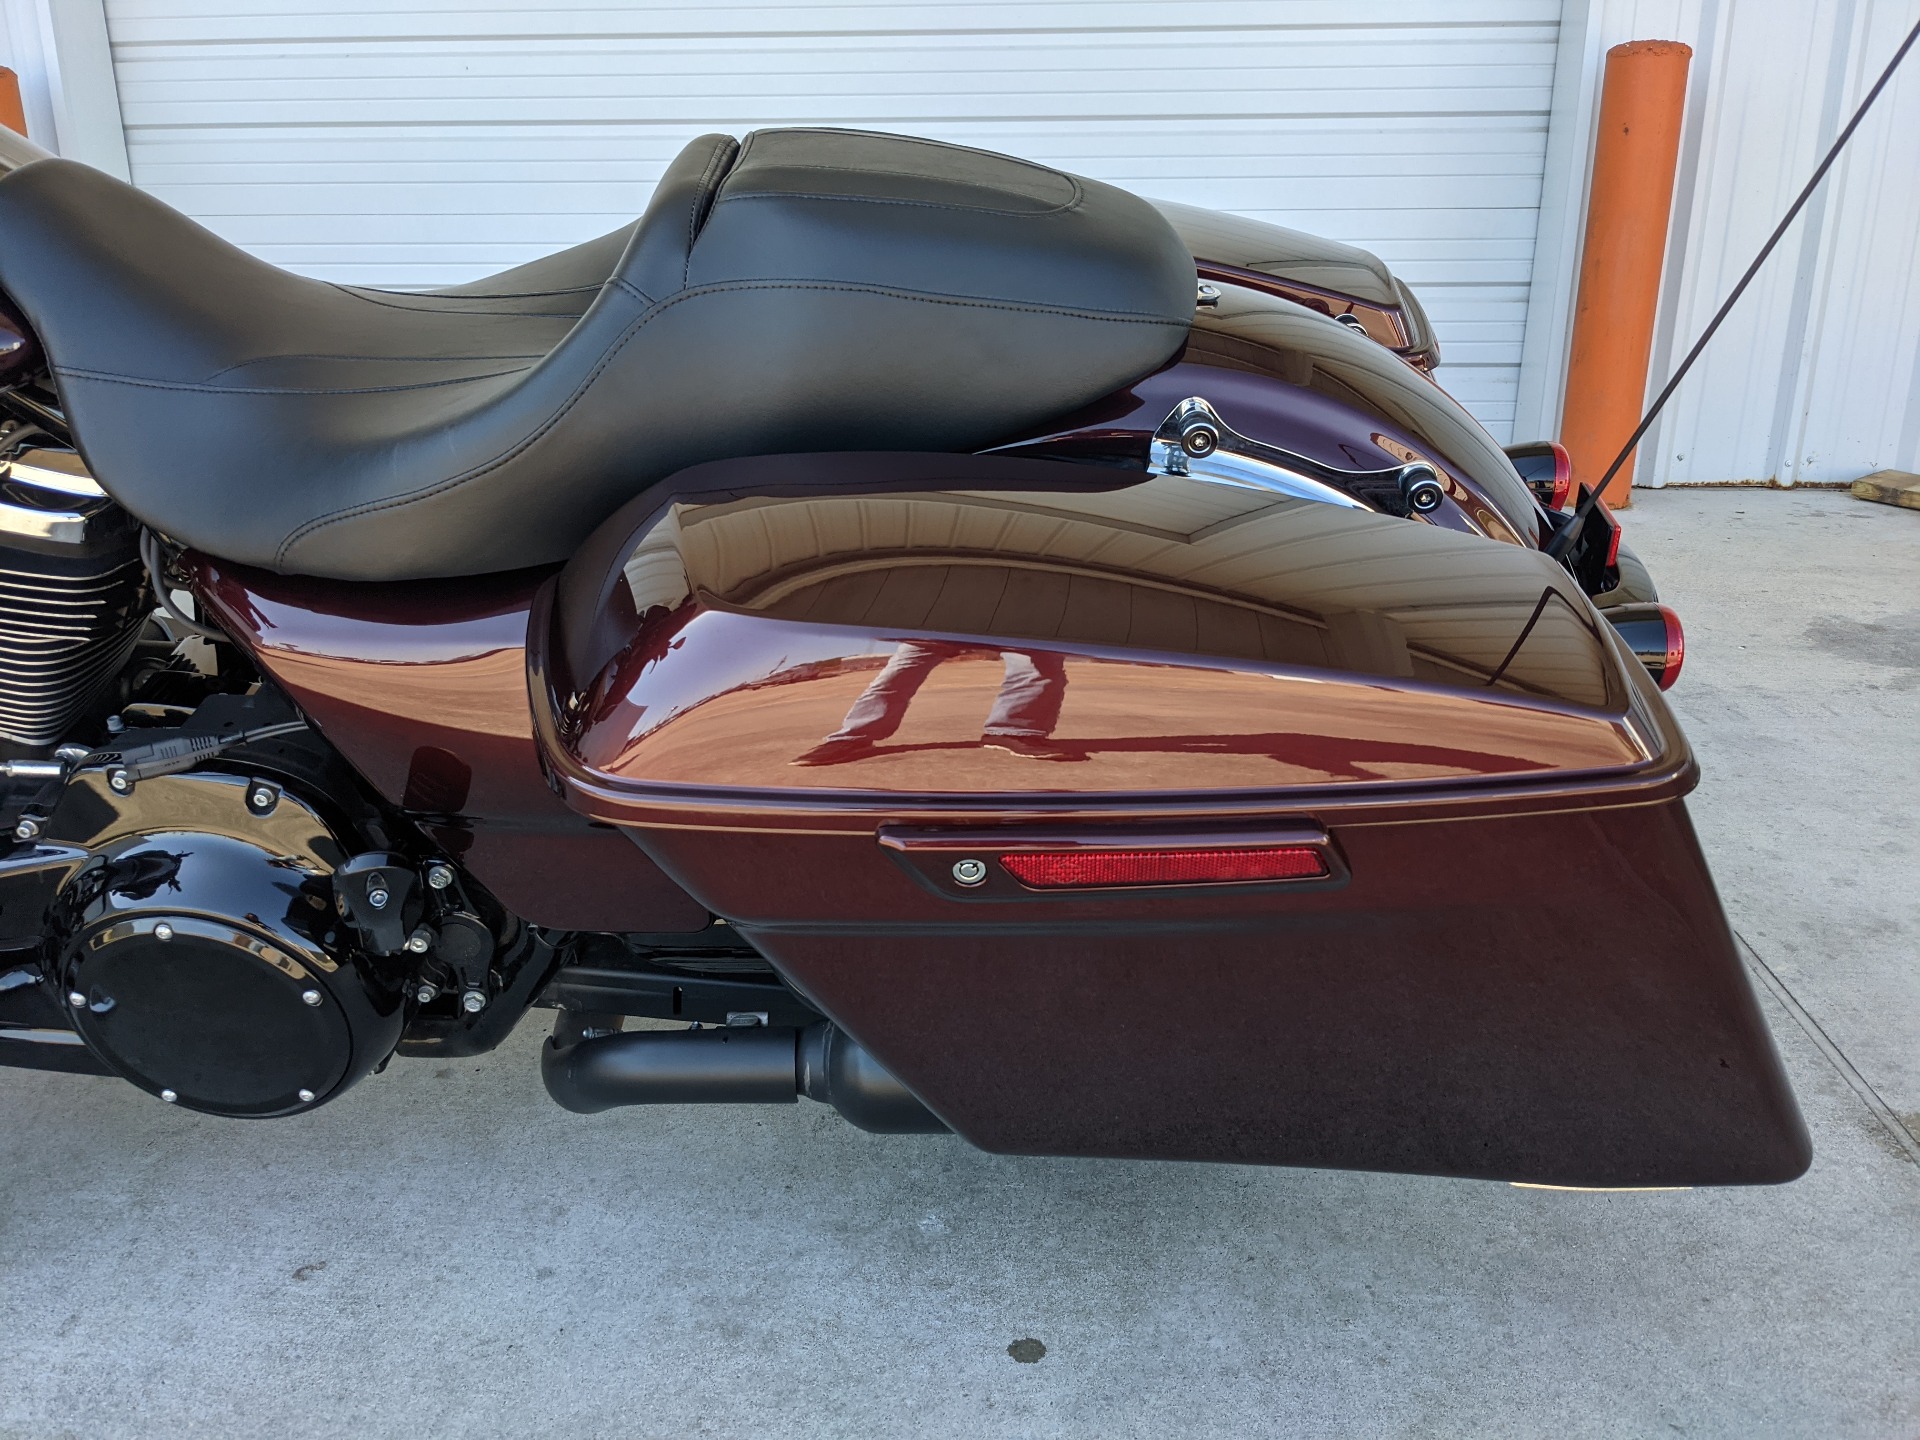 2018 Twisted Cherry Street Glide For Sale Promotion Off70